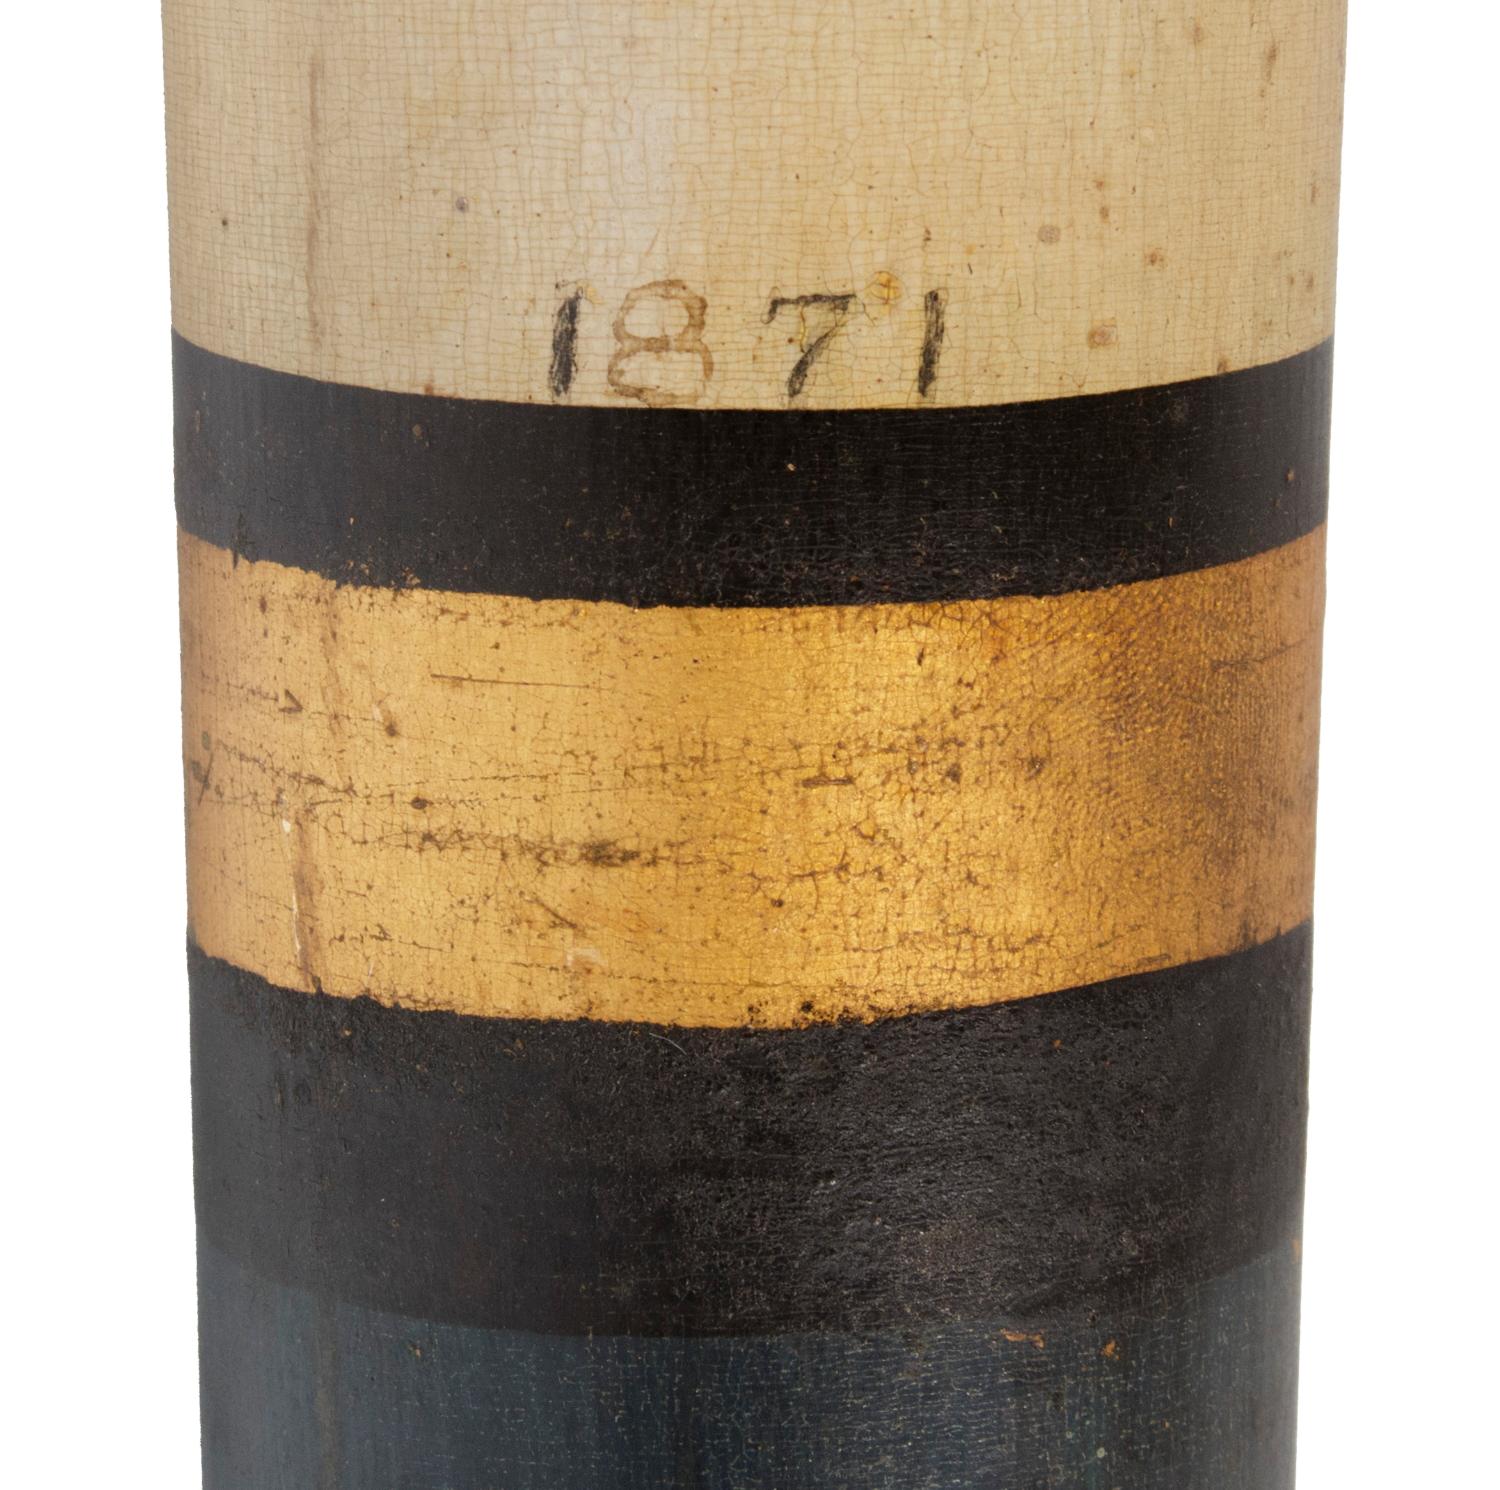 American Oversized, Paint-Decorated Baseball Bat Presented to J. Whipple